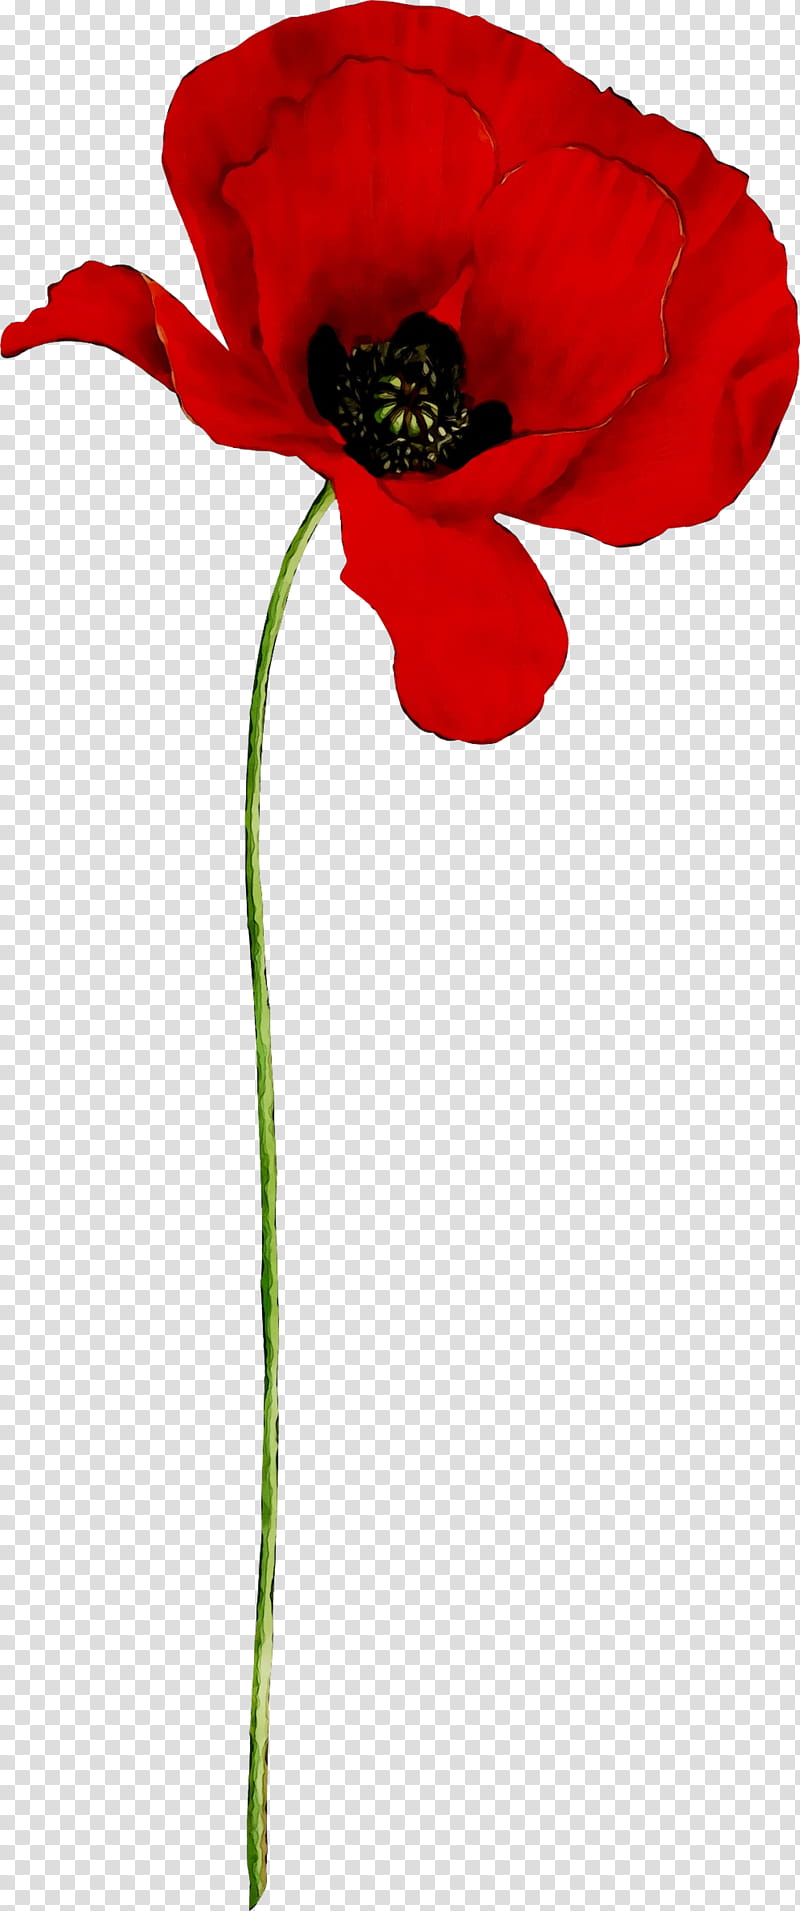 Flowers, Garden Roses, Budget, Plant Stem, Plants, Red, Poppy, Coquelicot transparent background PNG clipart